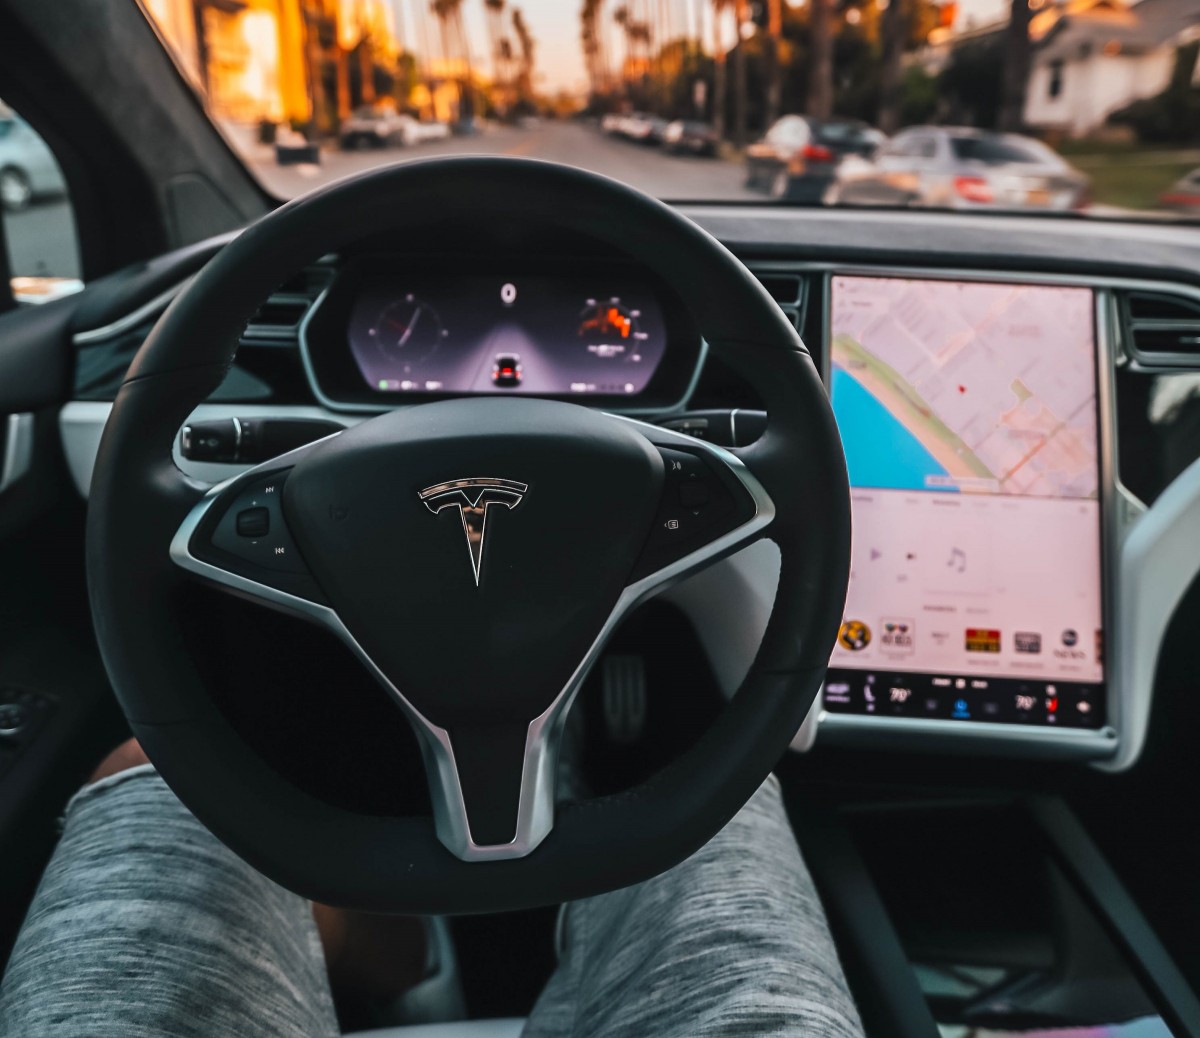 Tesla is hiring test drivers for Autopilot across the US and Canada